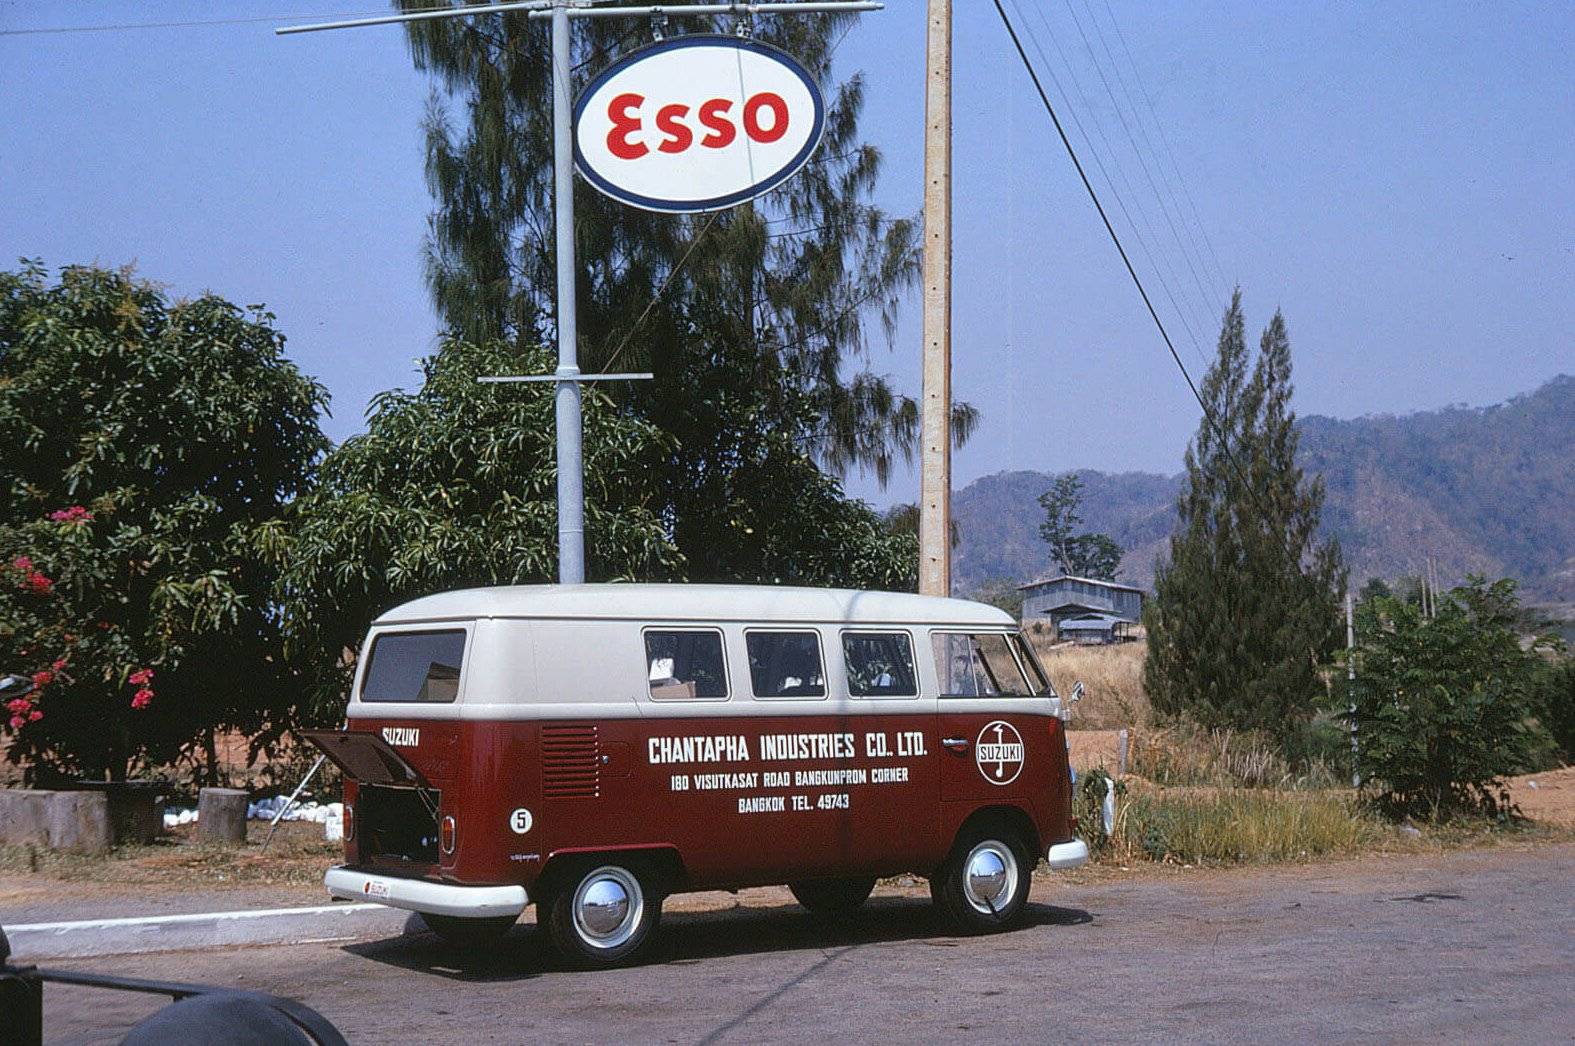 A small van with "Chantapha Industries Co. Ltd." painted on the side; parked under an "Esso" sign.